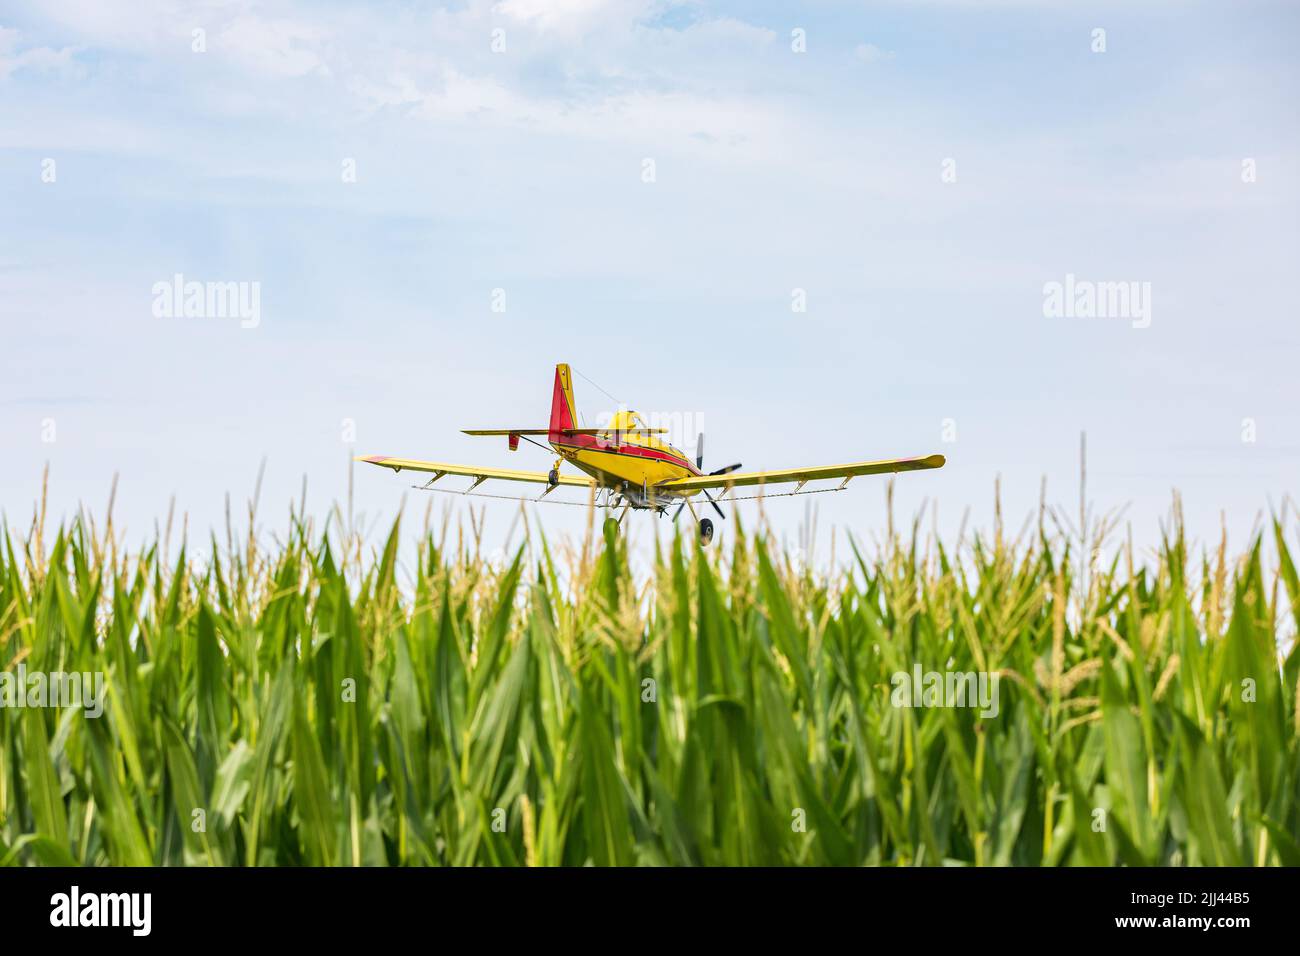 Crop duster airplane spraying chemicals on cornfield. Fungicide, pesticide and crop spraying concept. Stock Photo